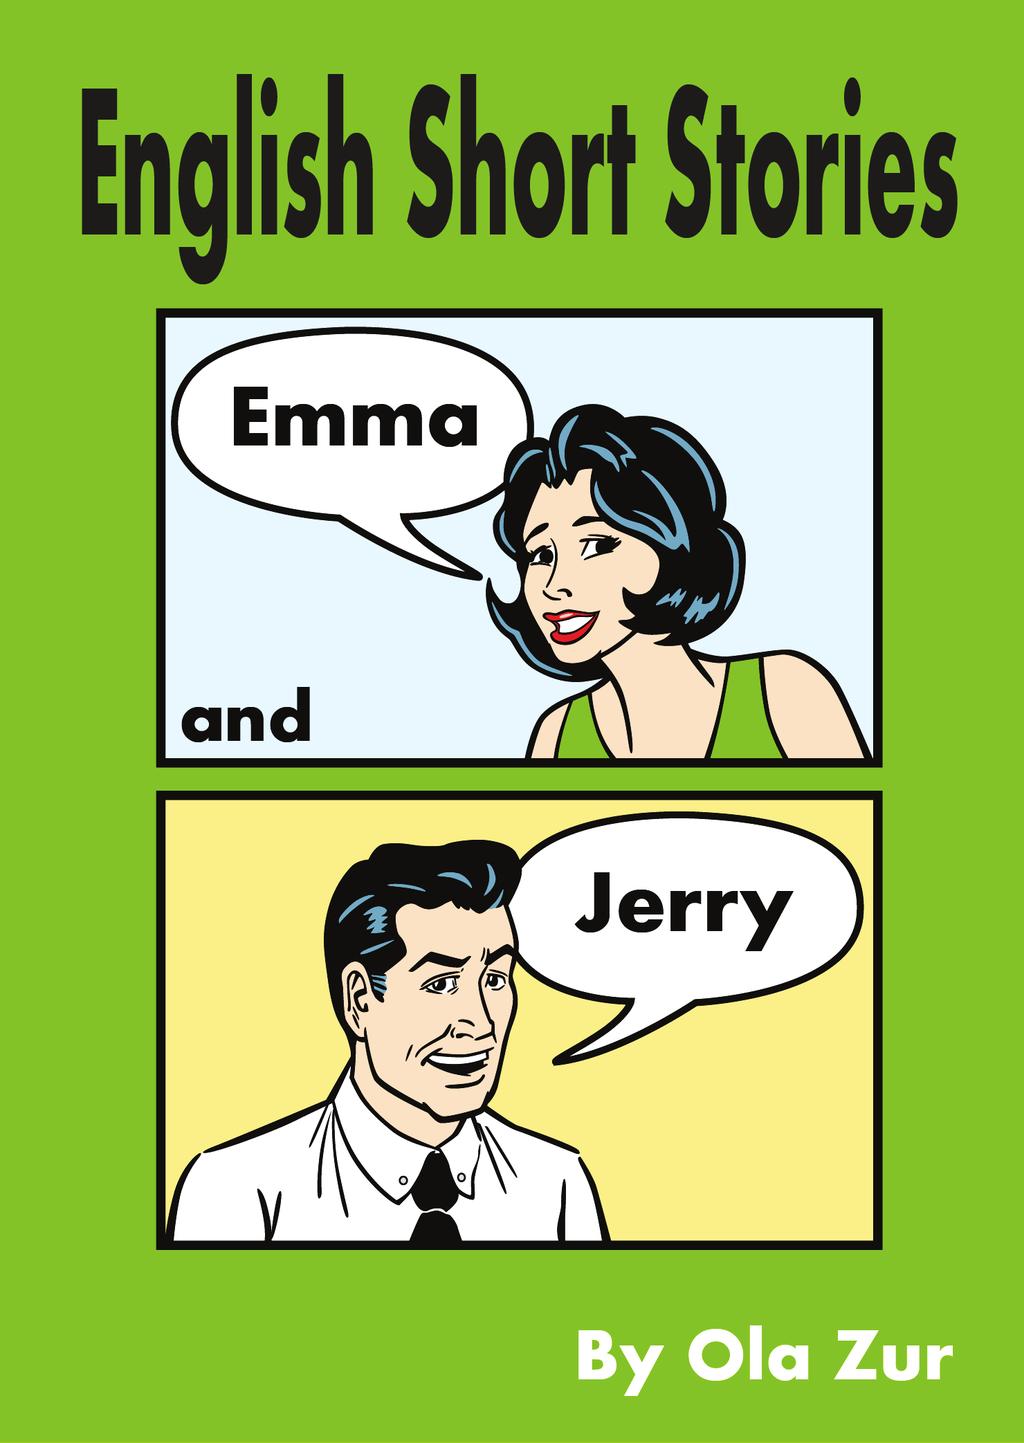 1 English Short Stories for Beginners, www.